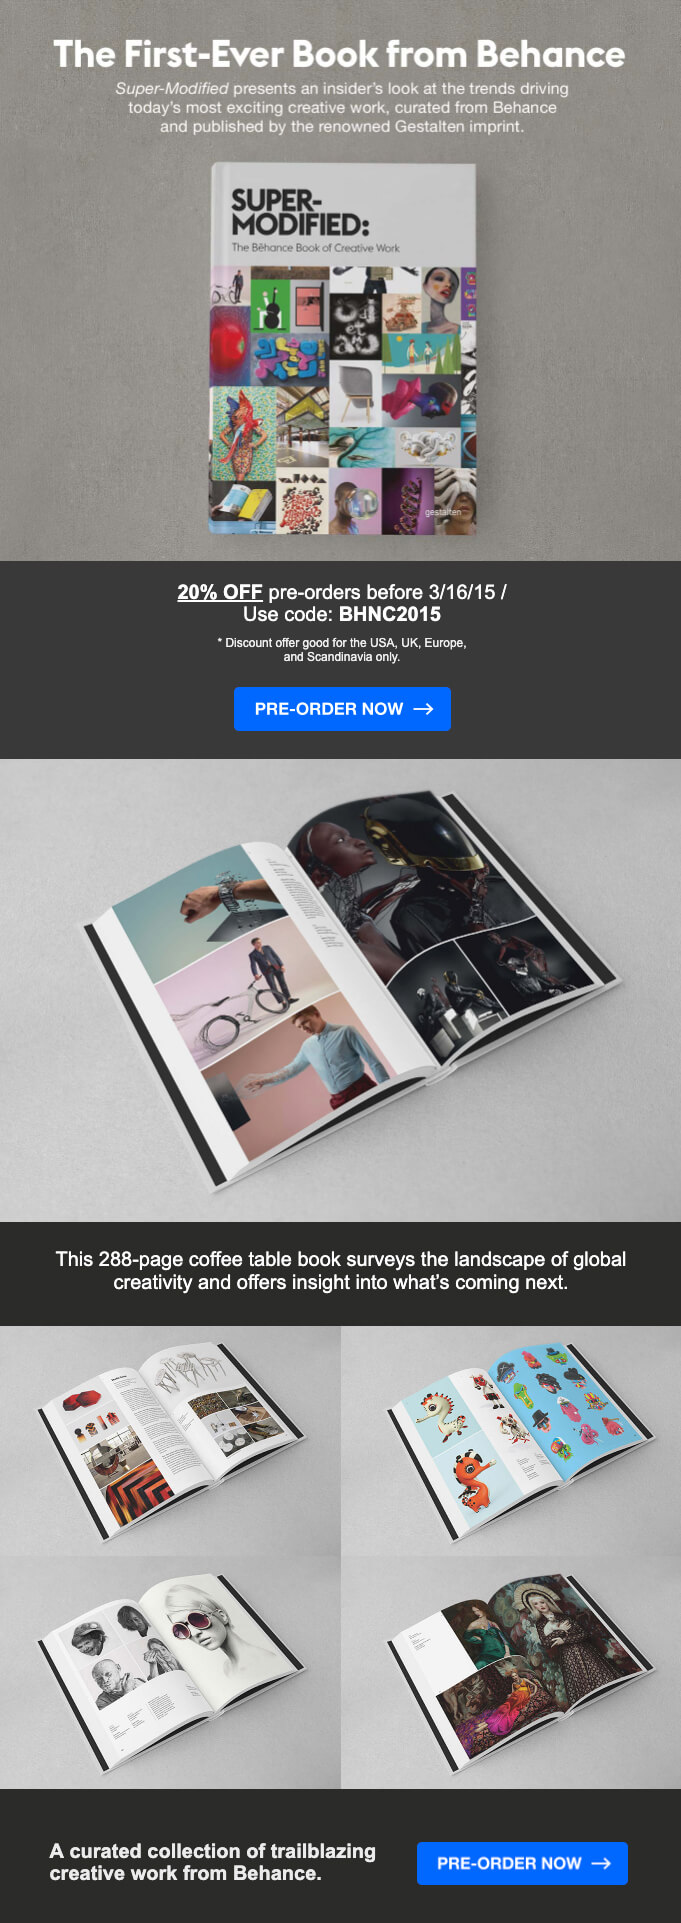 Behance product launch announcement email demonstrating pre-order best practices